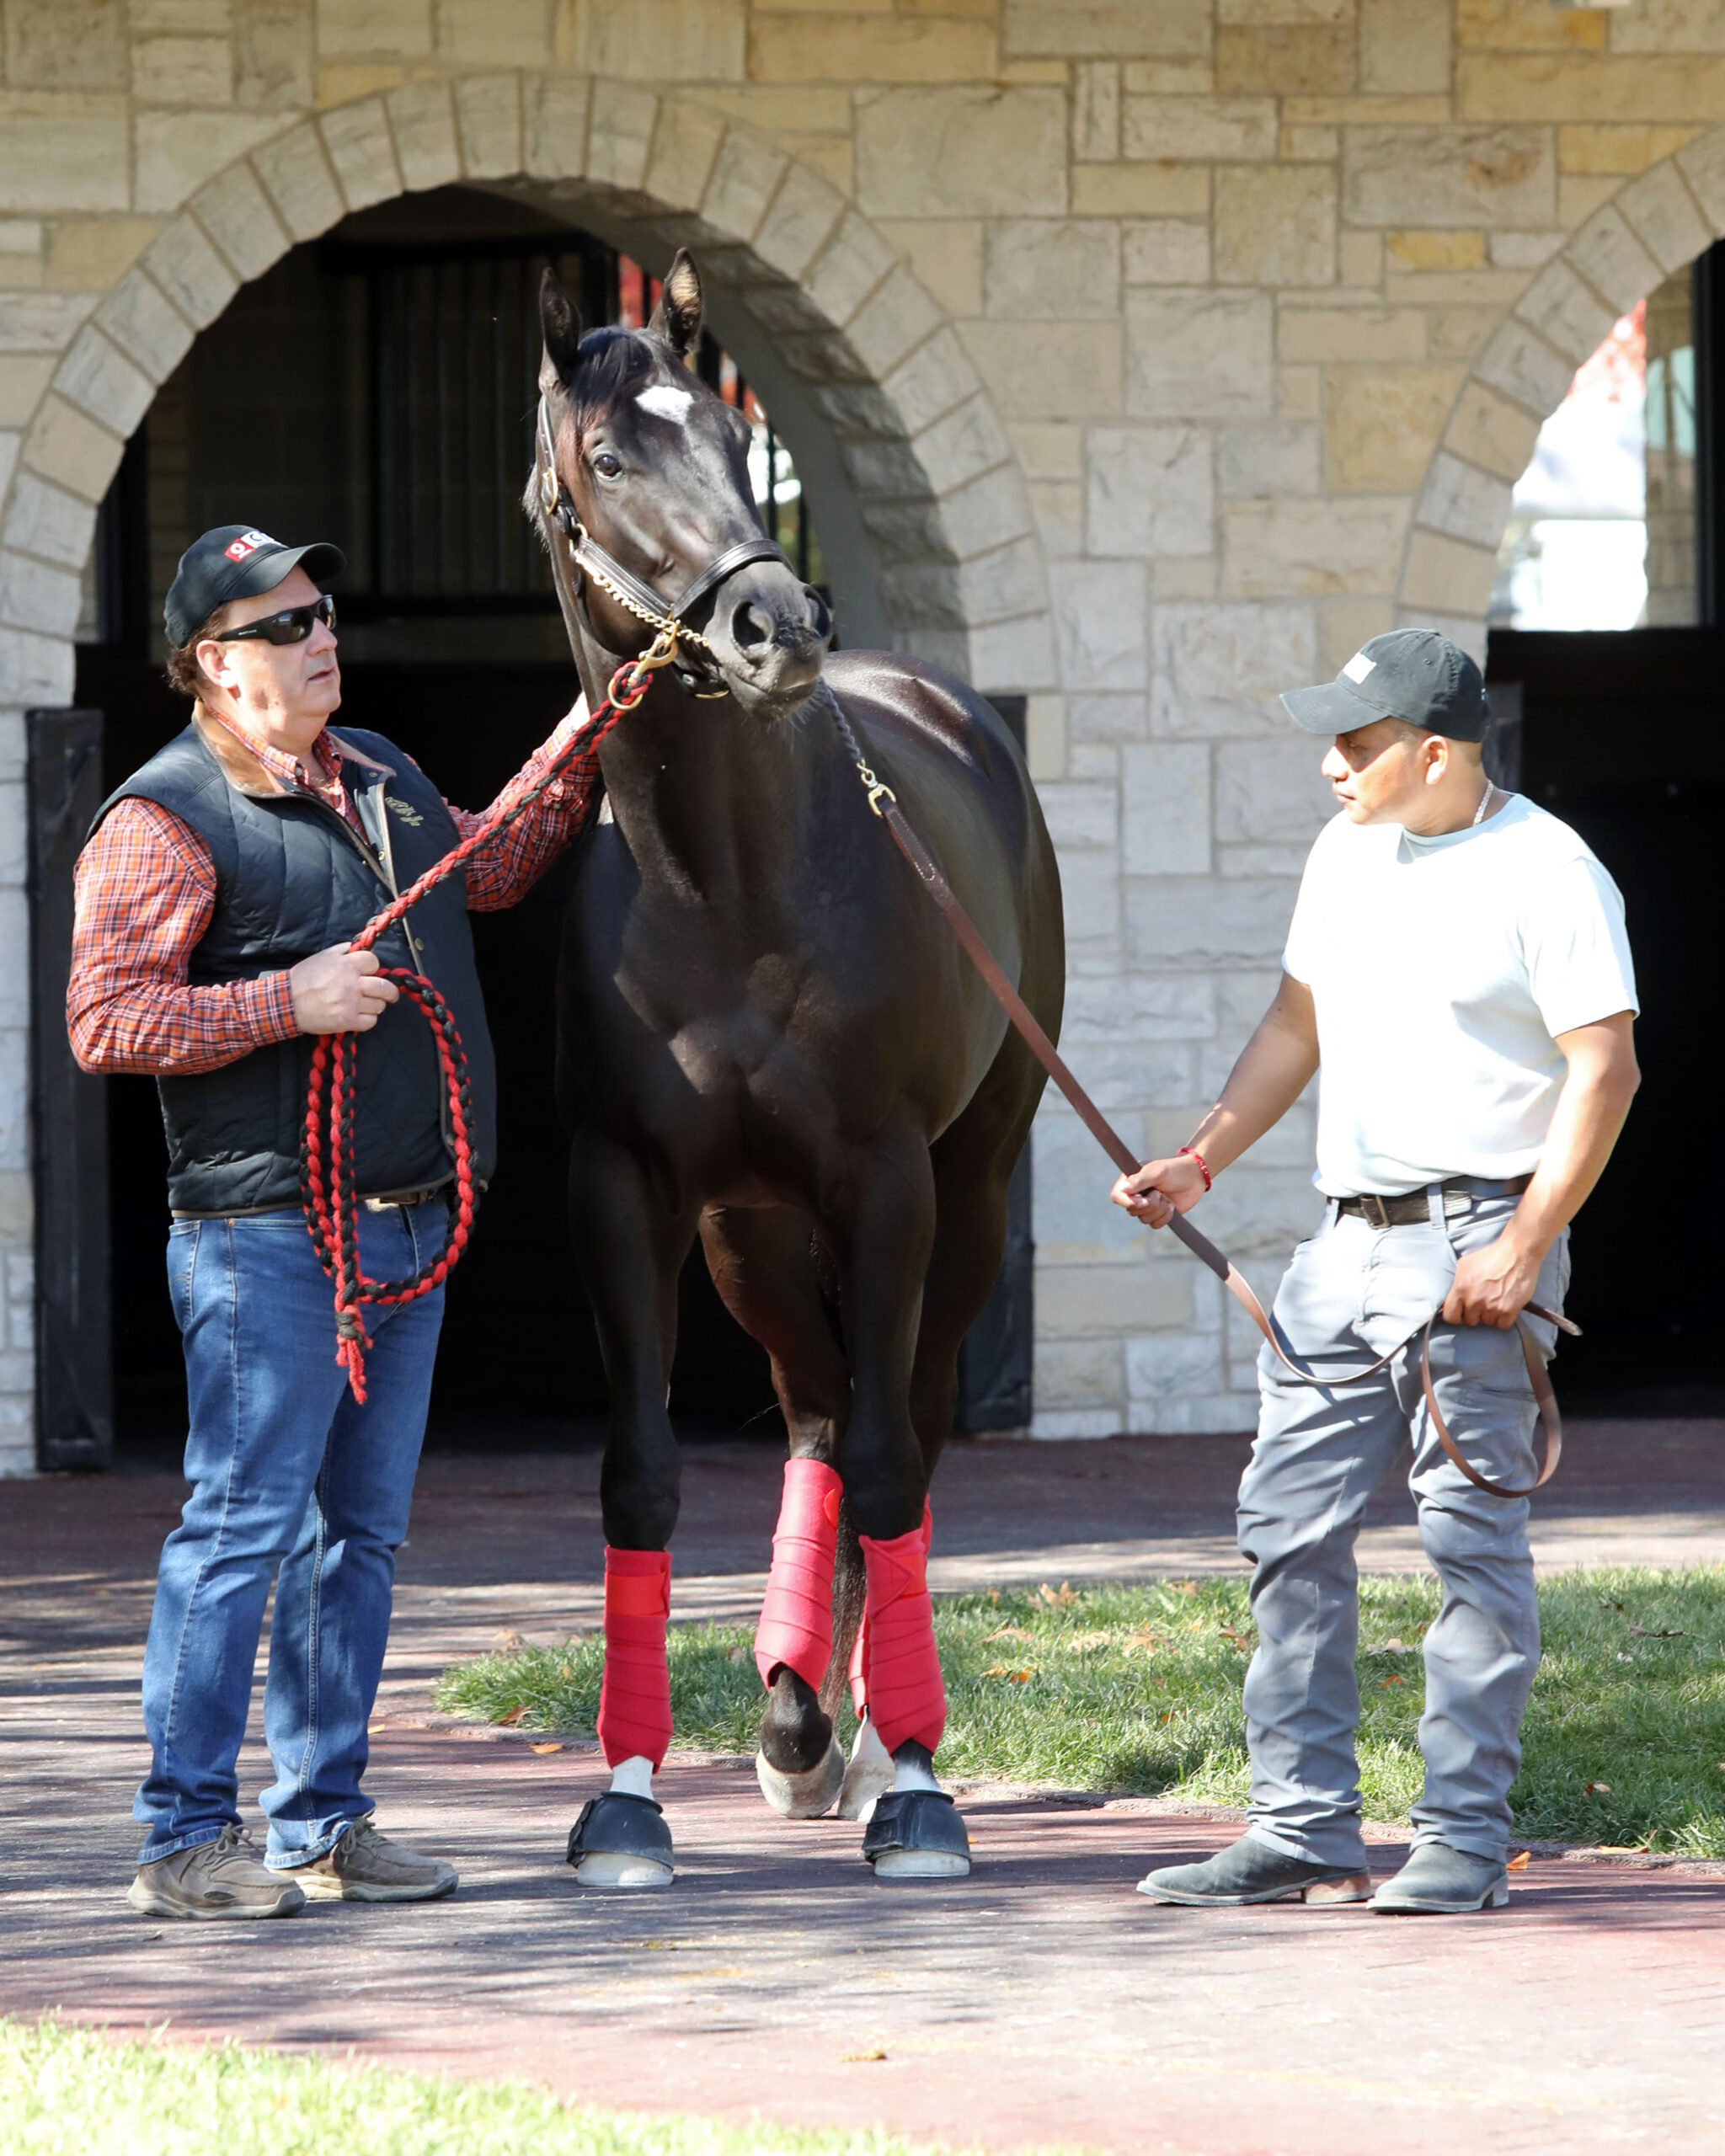 Trackside View » OAKLAWN TYLER’S TRIBE FAVORED IN OPENING DAY ADVENT